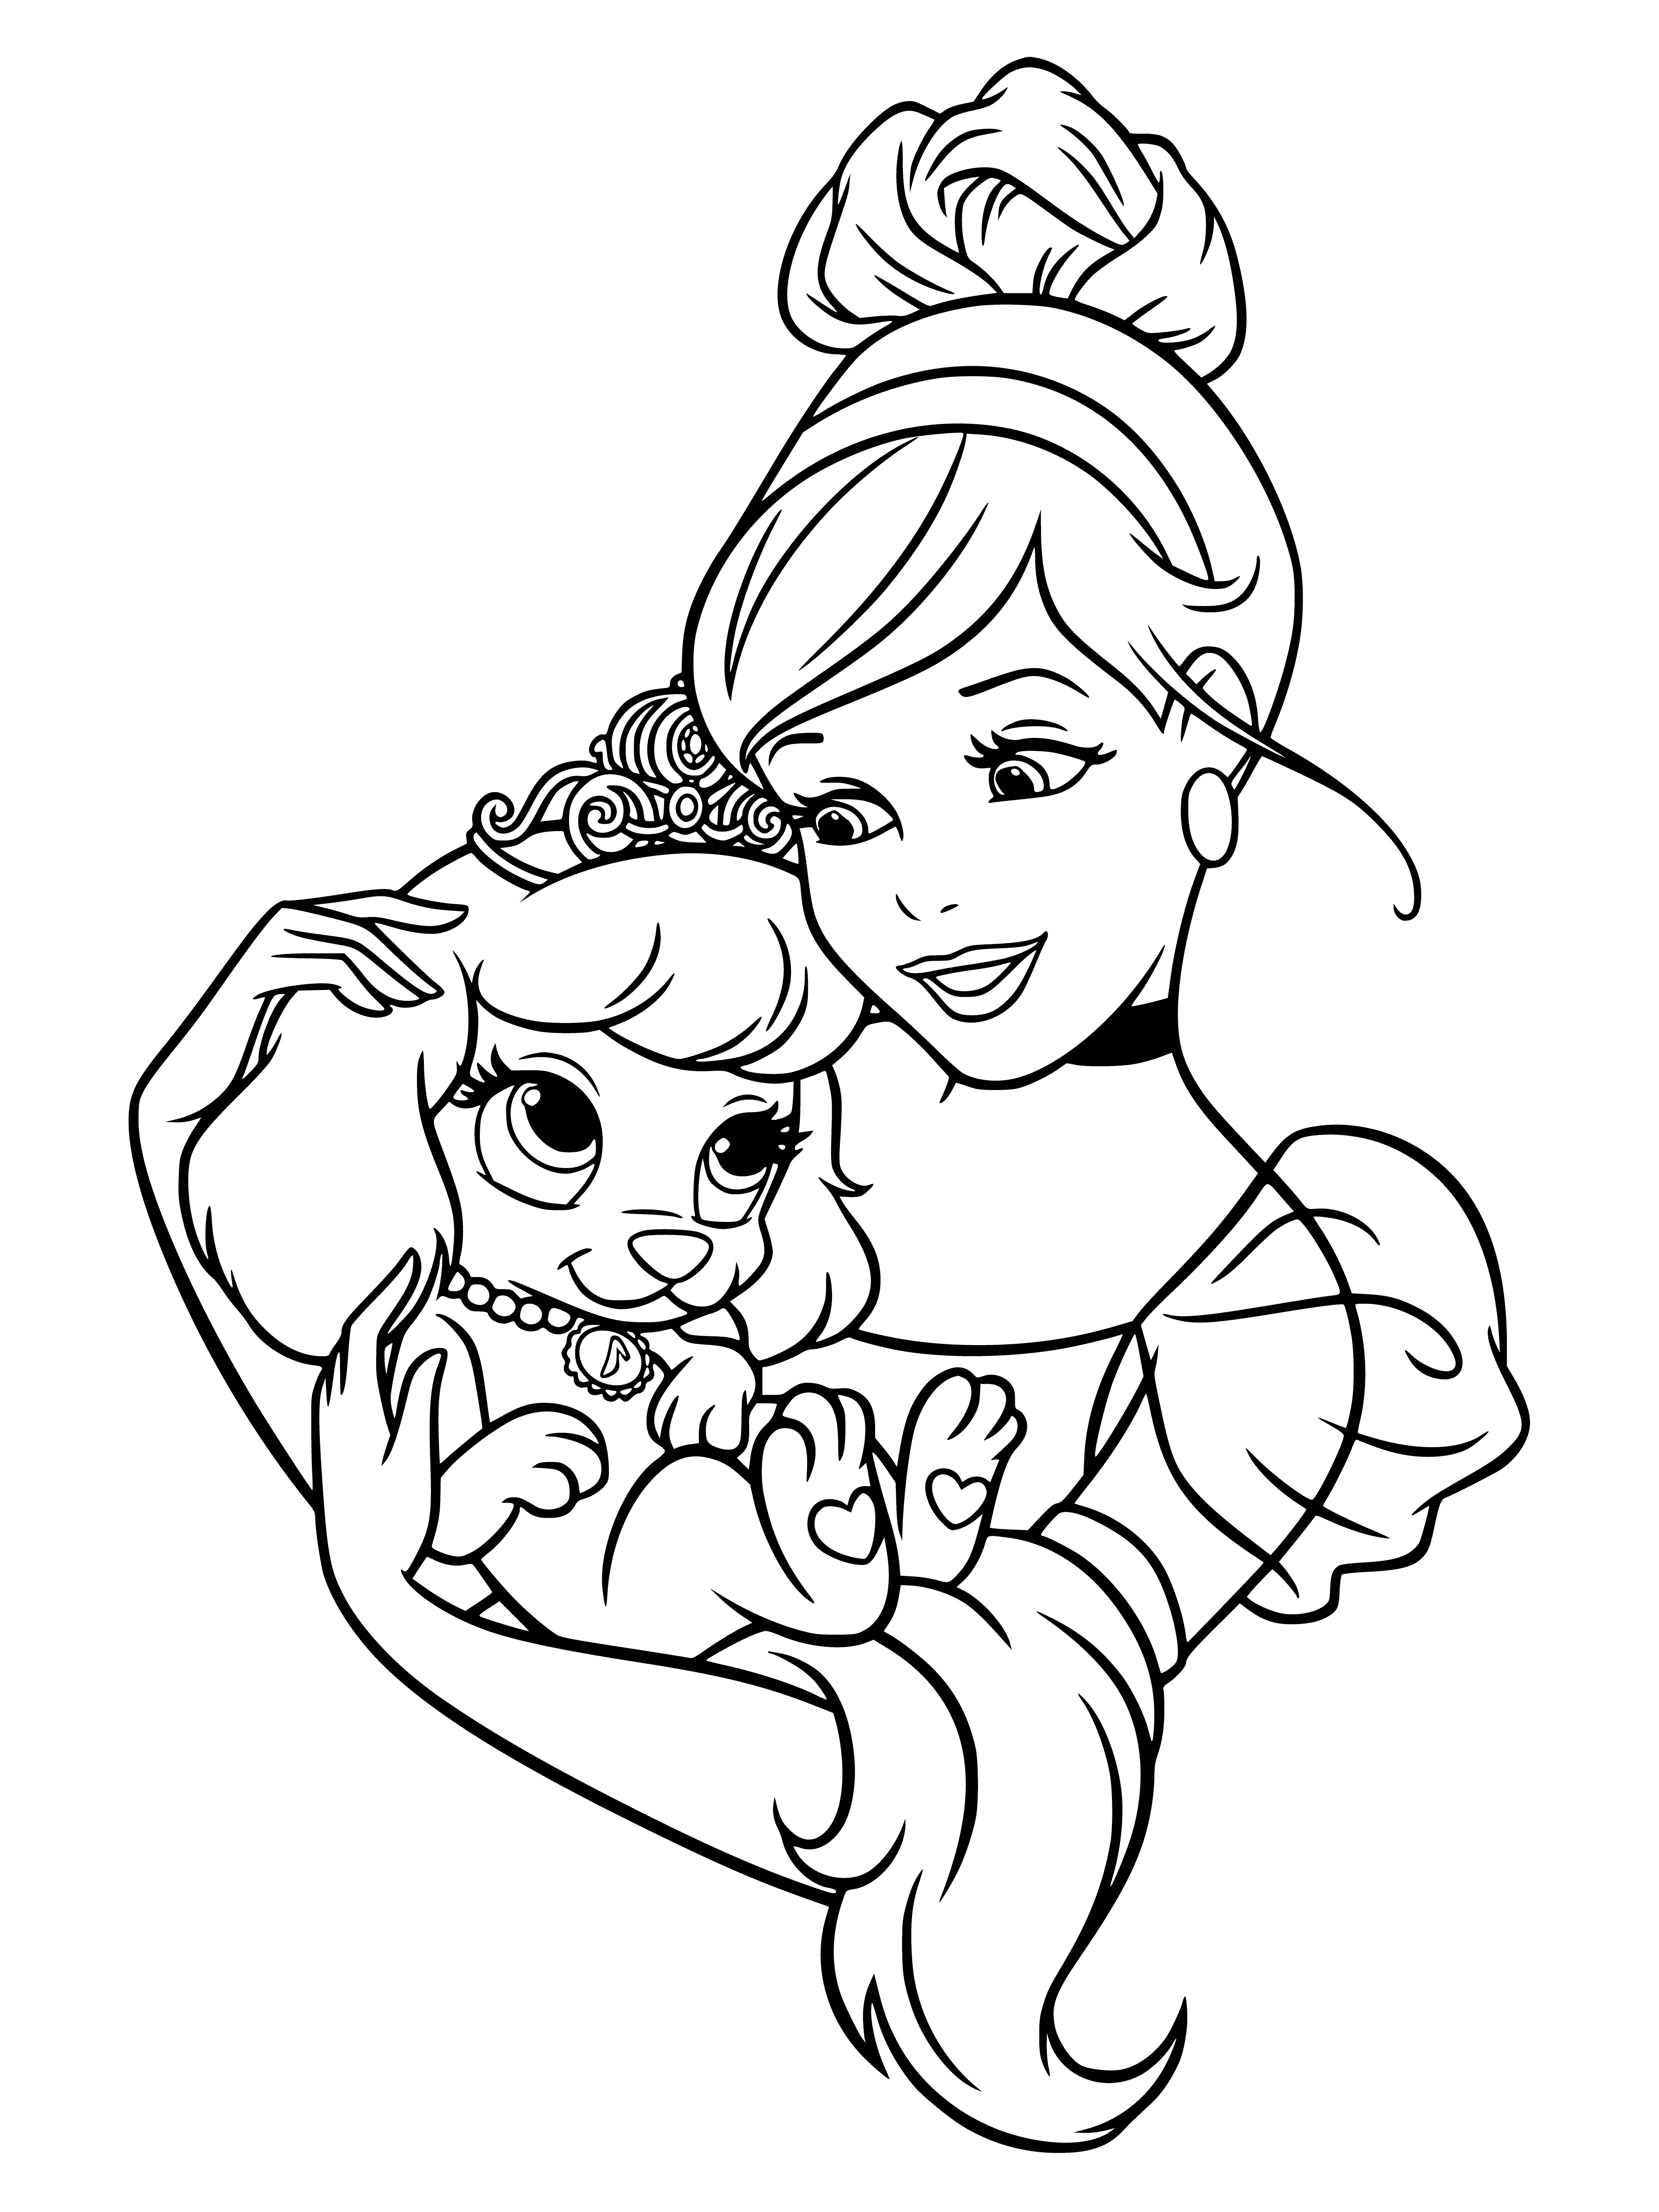 coloring page: Unlike most princesses, Cinderella had only mice and birds for company in her stepmother's home.